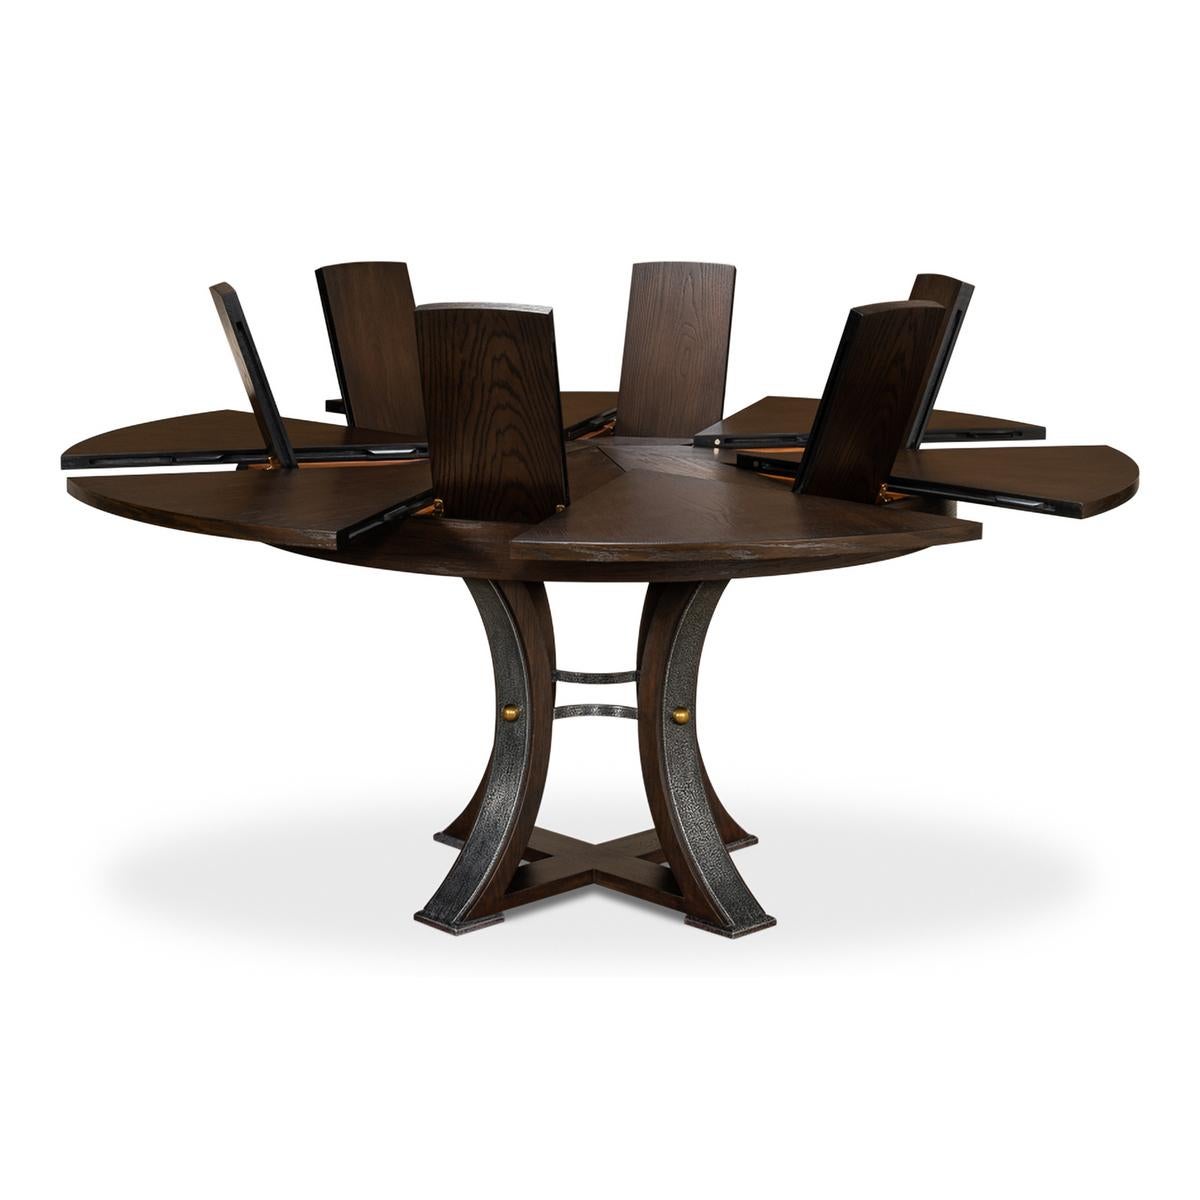 Modern Industrial Dining Table, 70, Burnt Brown In New Condition For Sale In Westwood, NJ